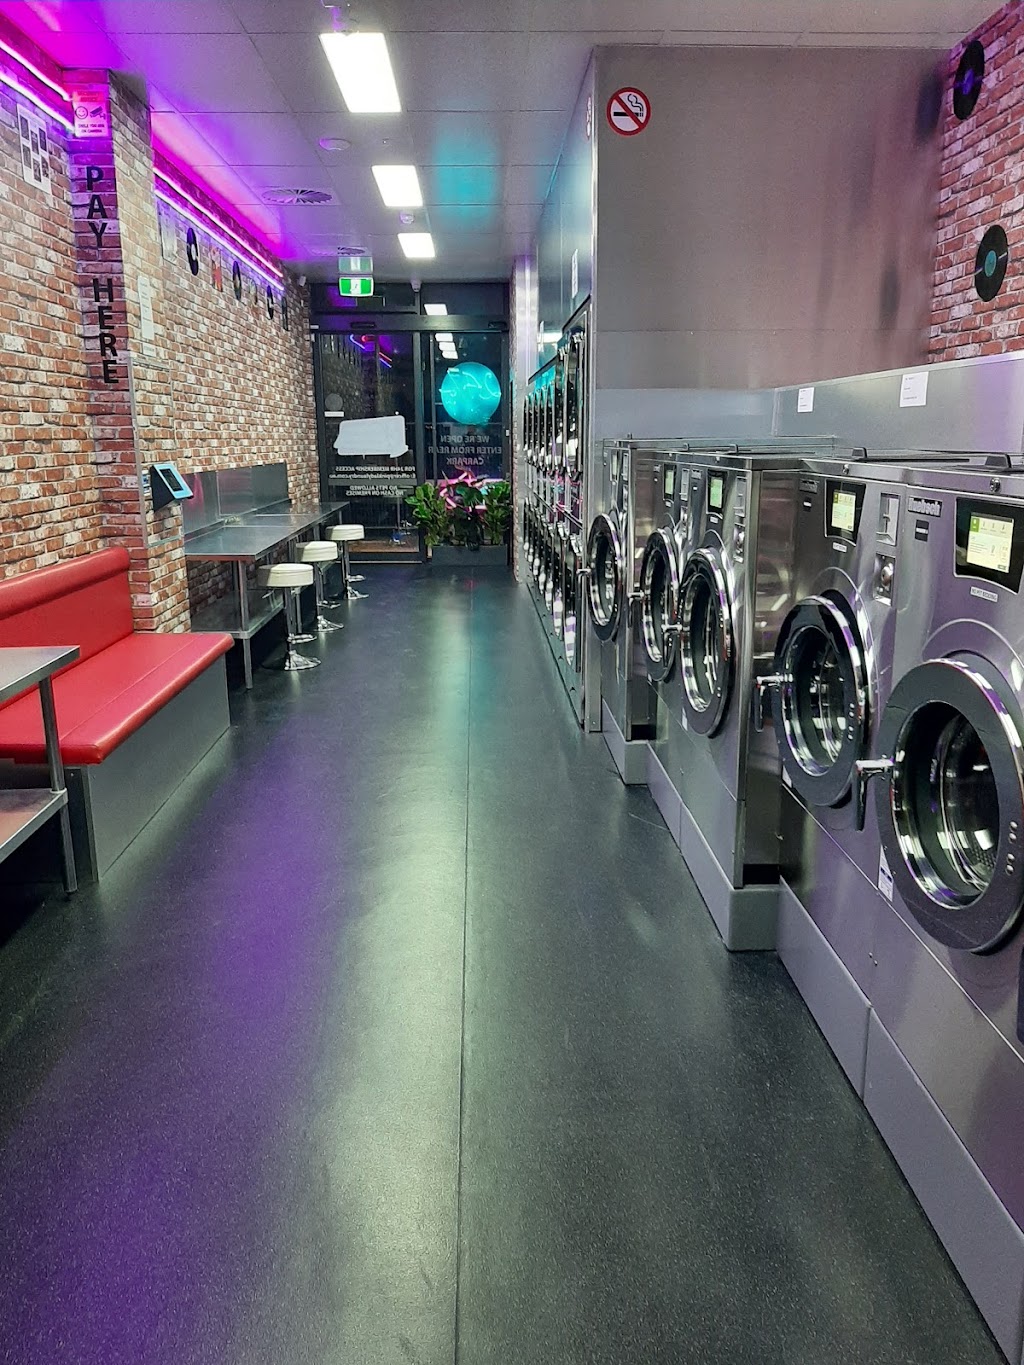 Pink Lady Laundromat Officer | laundry | 45 Siding Ave, Officer VIC 3809, Australia | 0425745159 OR +61 425 745 159